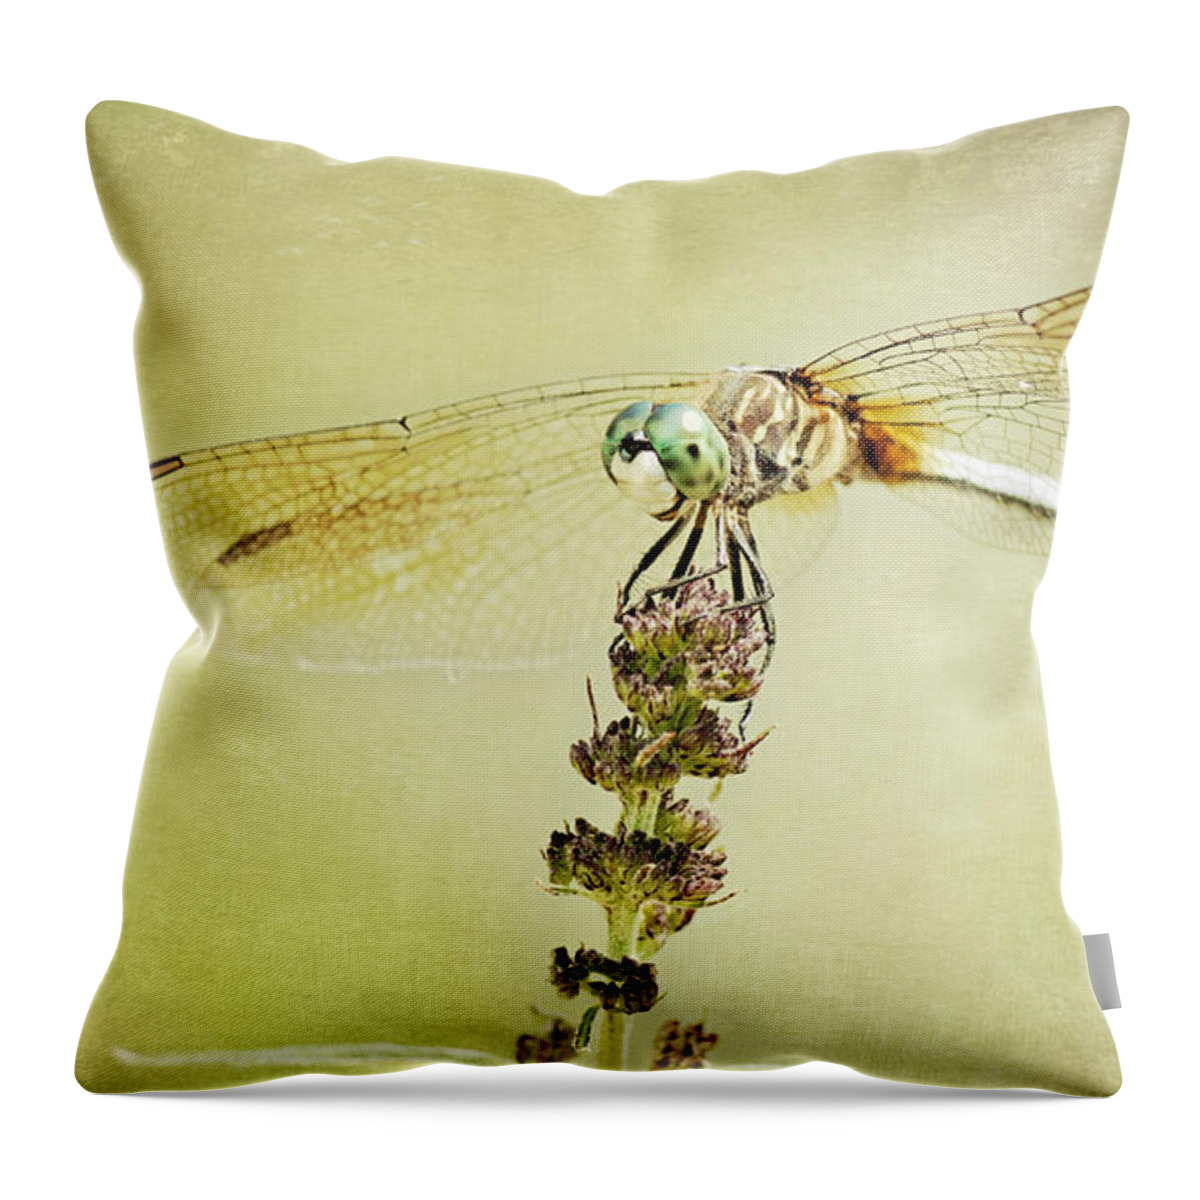 Insect Throw Pillow featuring the photograph Happy Dragon by Pam Holdsworth